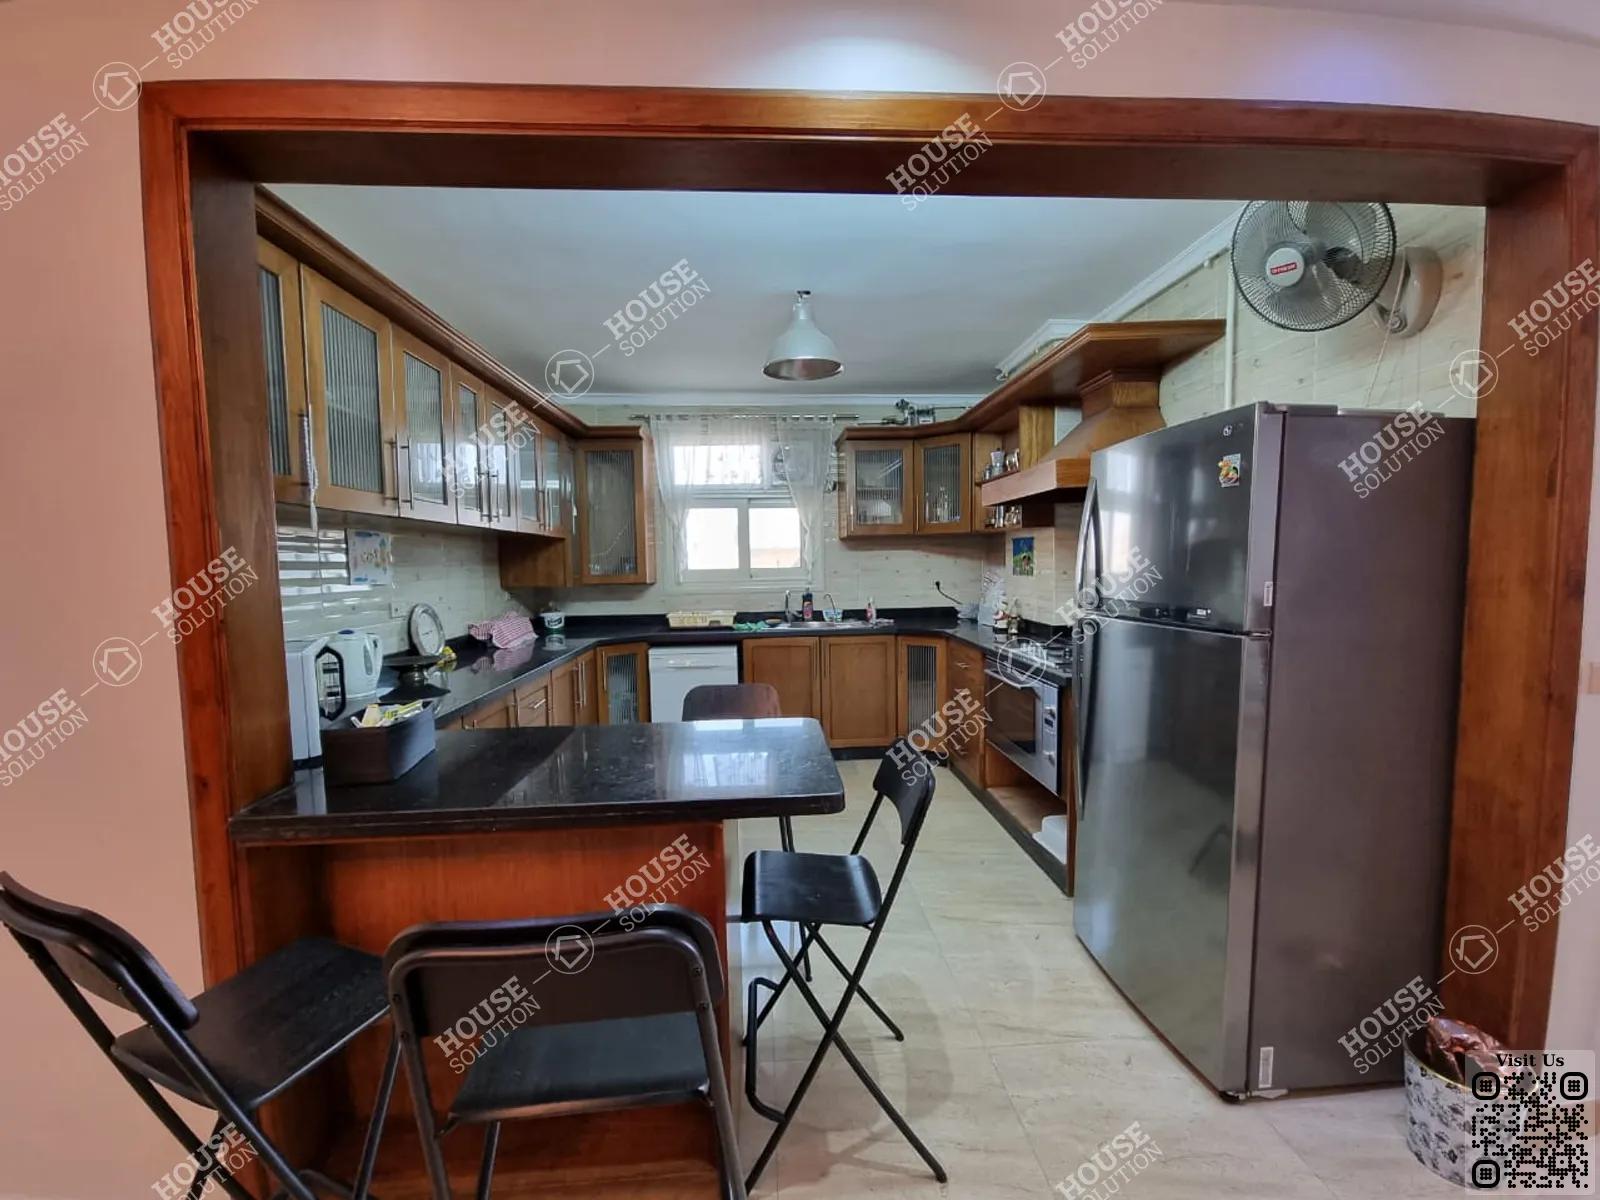 KITCHEN  @ Apartments For Rent In Maadi Maadi Sarayat Area: 220 m² consists of 3 Bedrooms 3 Bathrooms Modern furnished 5 stars #5559-2